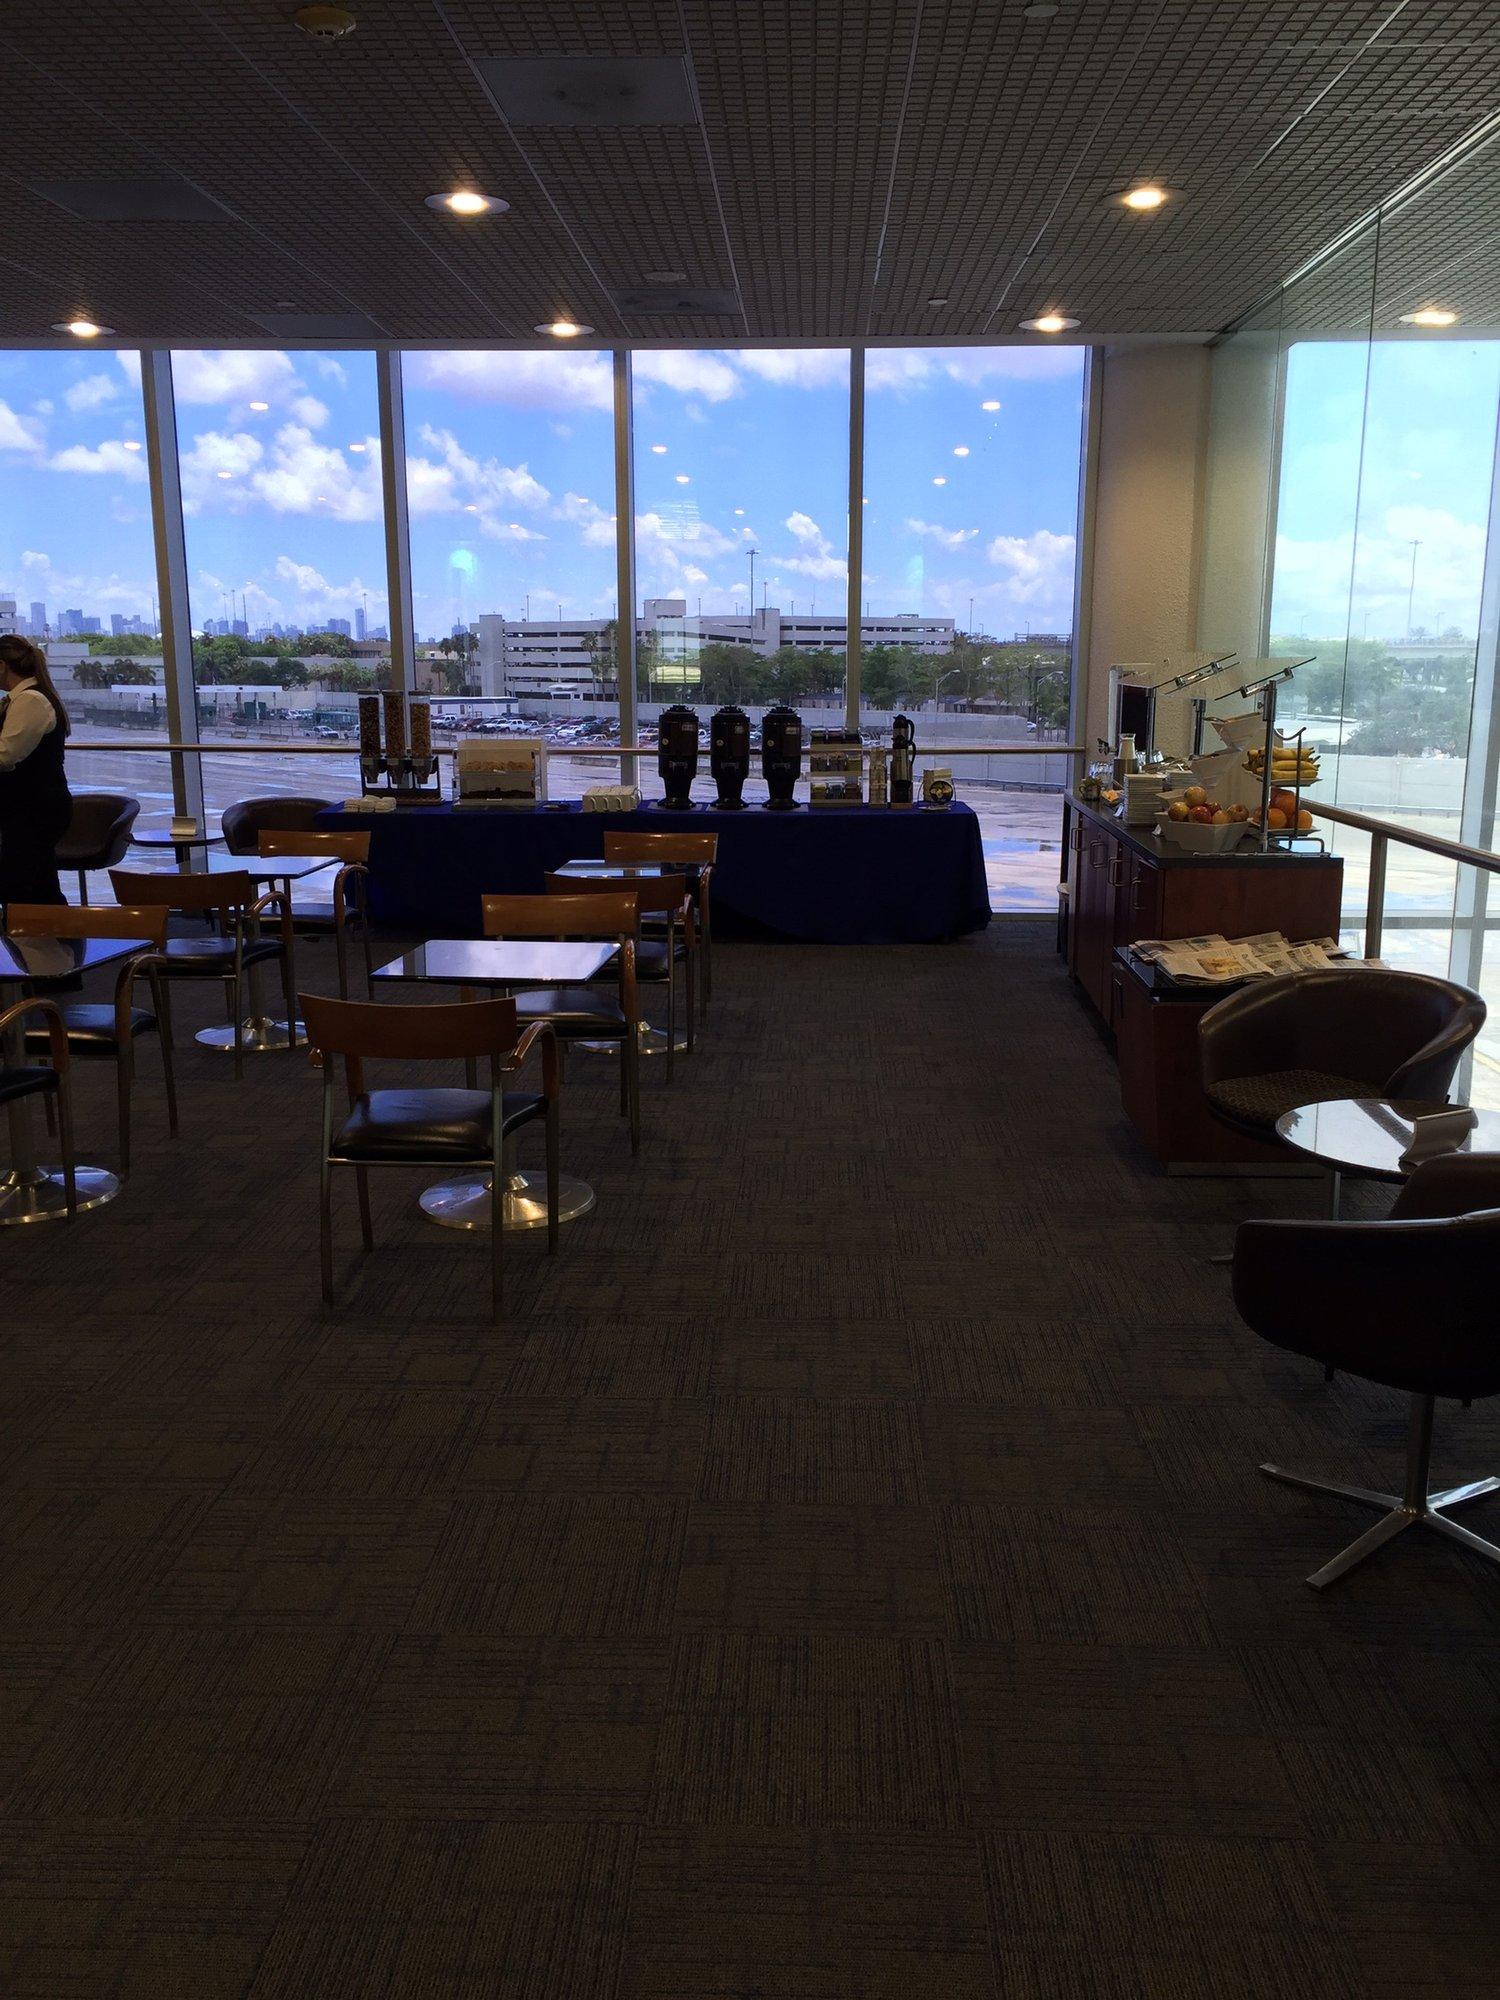 American Airlines Admirals Club (Gate D15) image 6 of 25